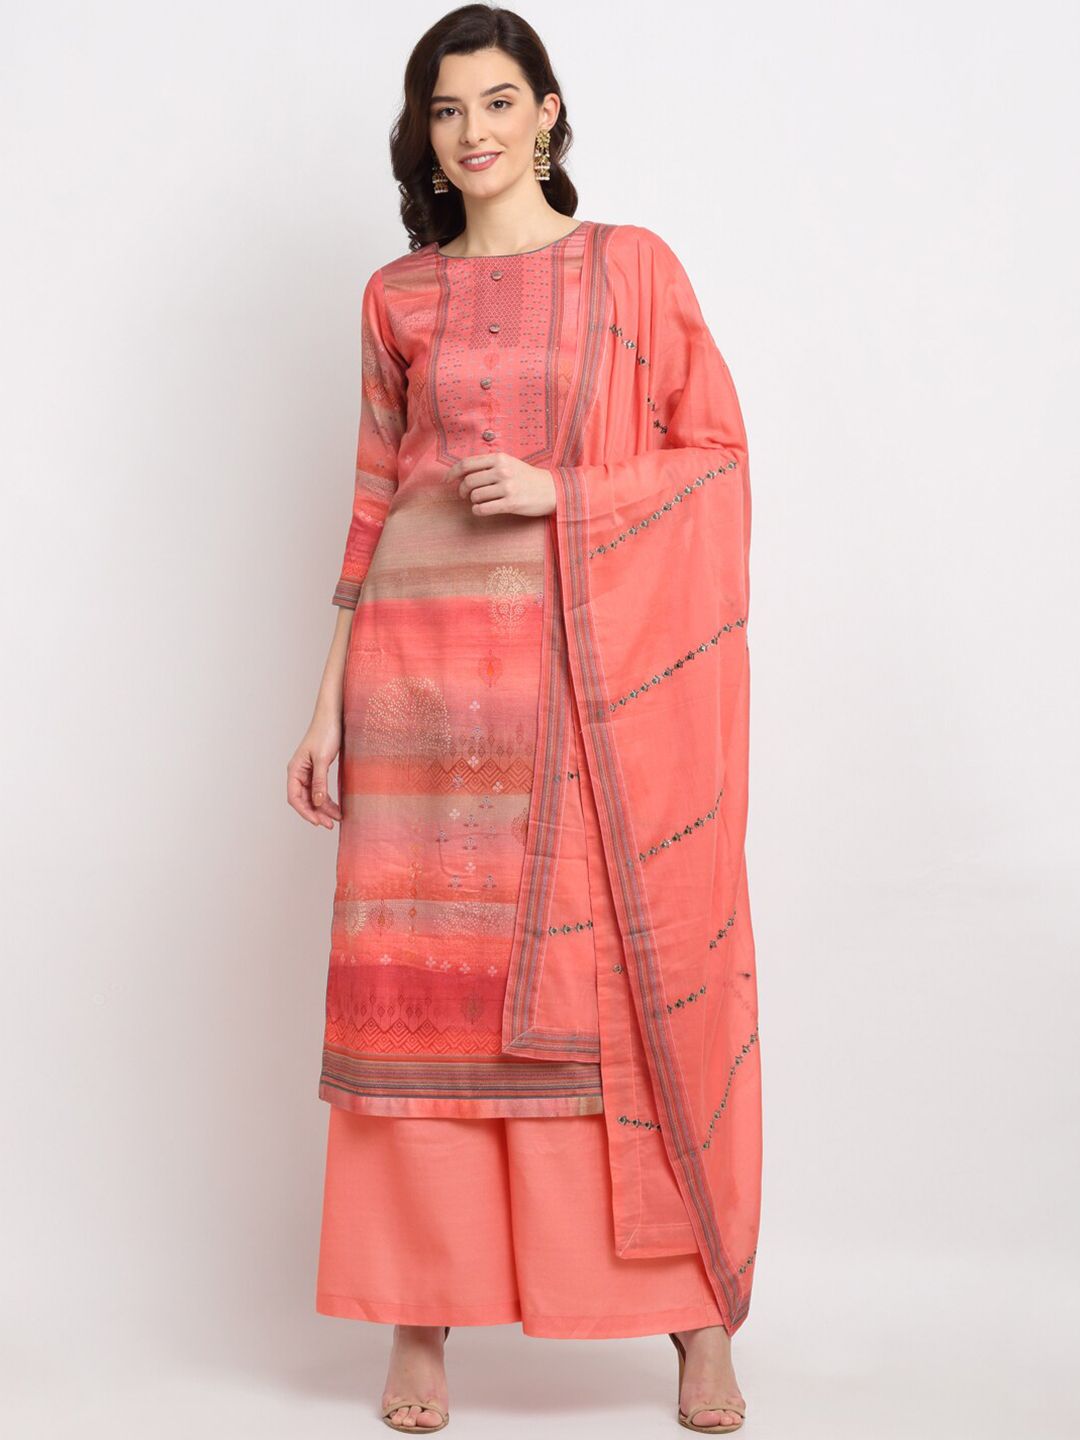 Stylee LIFESTYLE Peach-Coloured & Gold-Toned Digitally Printed Unstitched Dress Material Price in India